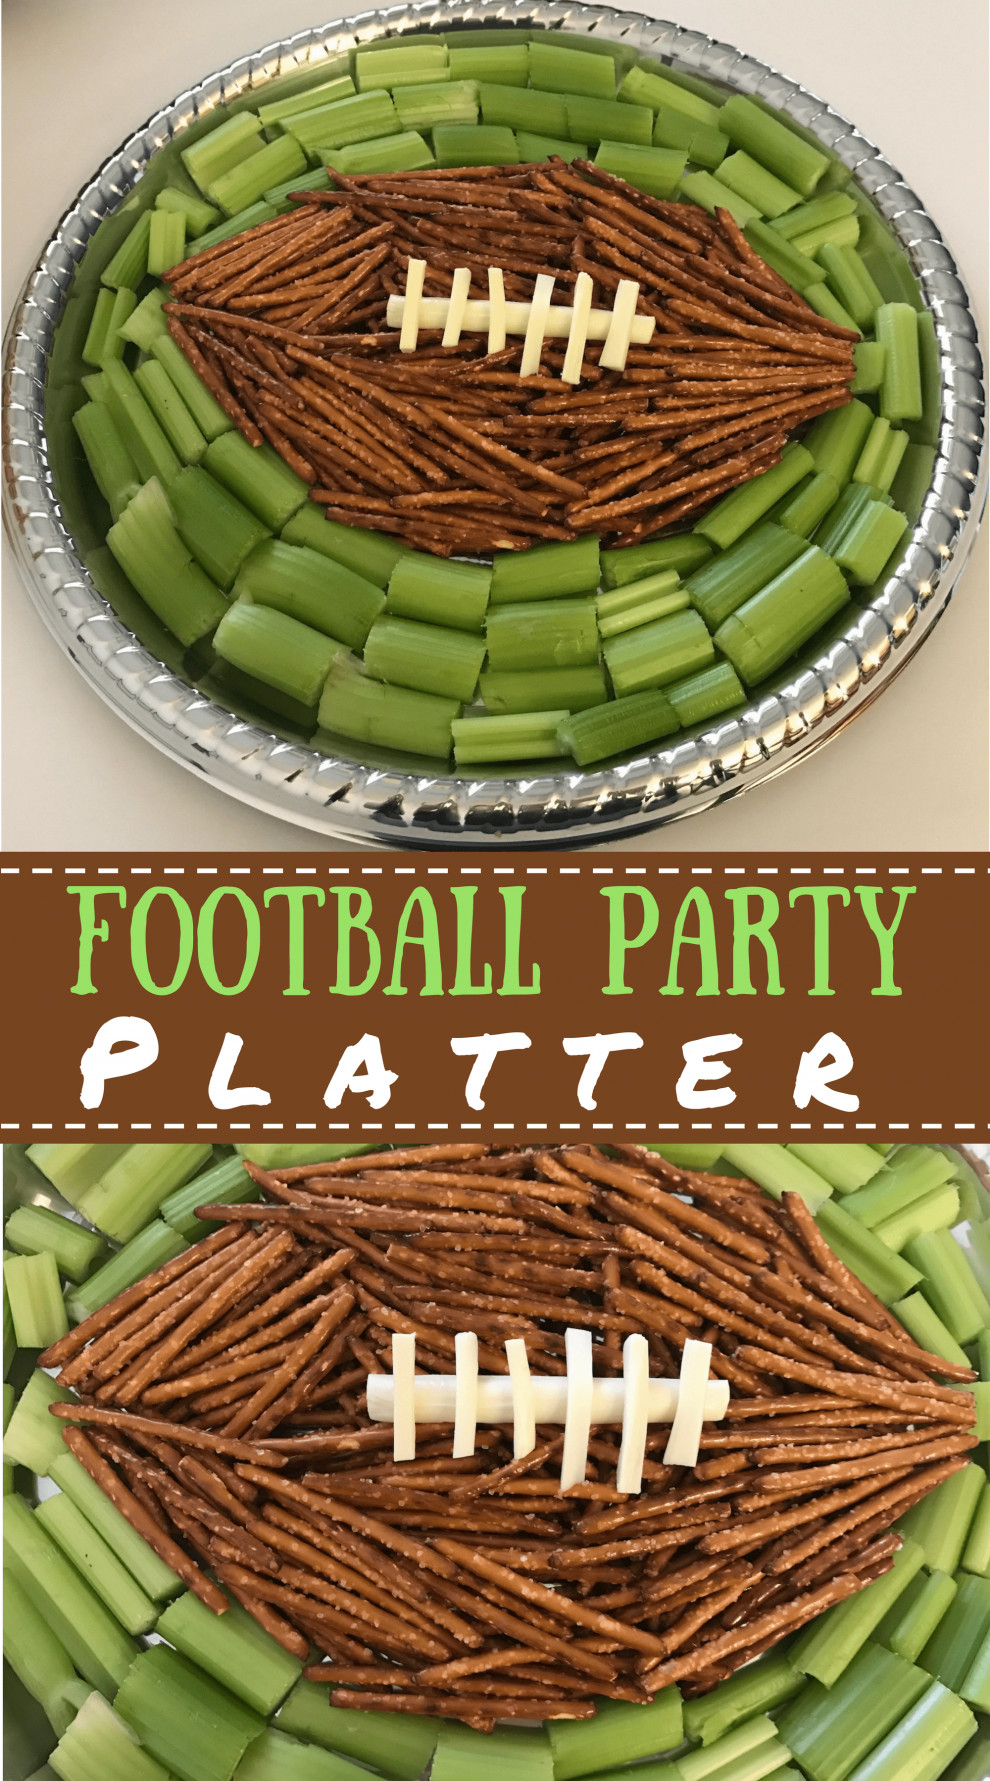 Healthy Football Appetizers
 Healthy Football Party Appetizer